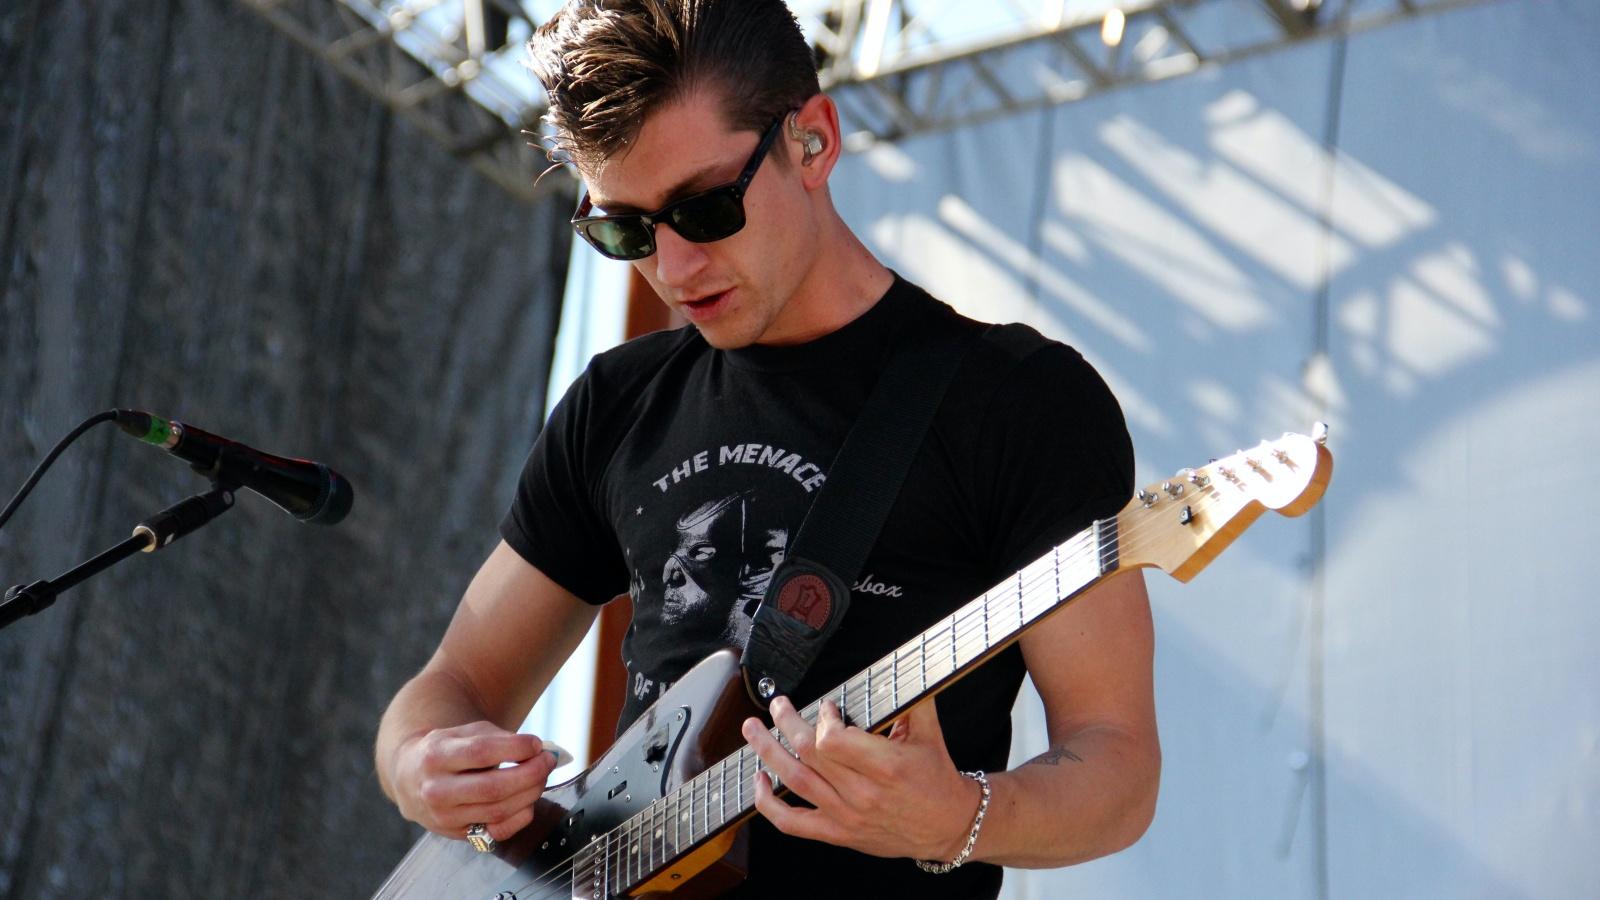 Arctic Monkeys' Alex Turner performing with an electric guitar onstage at a concert